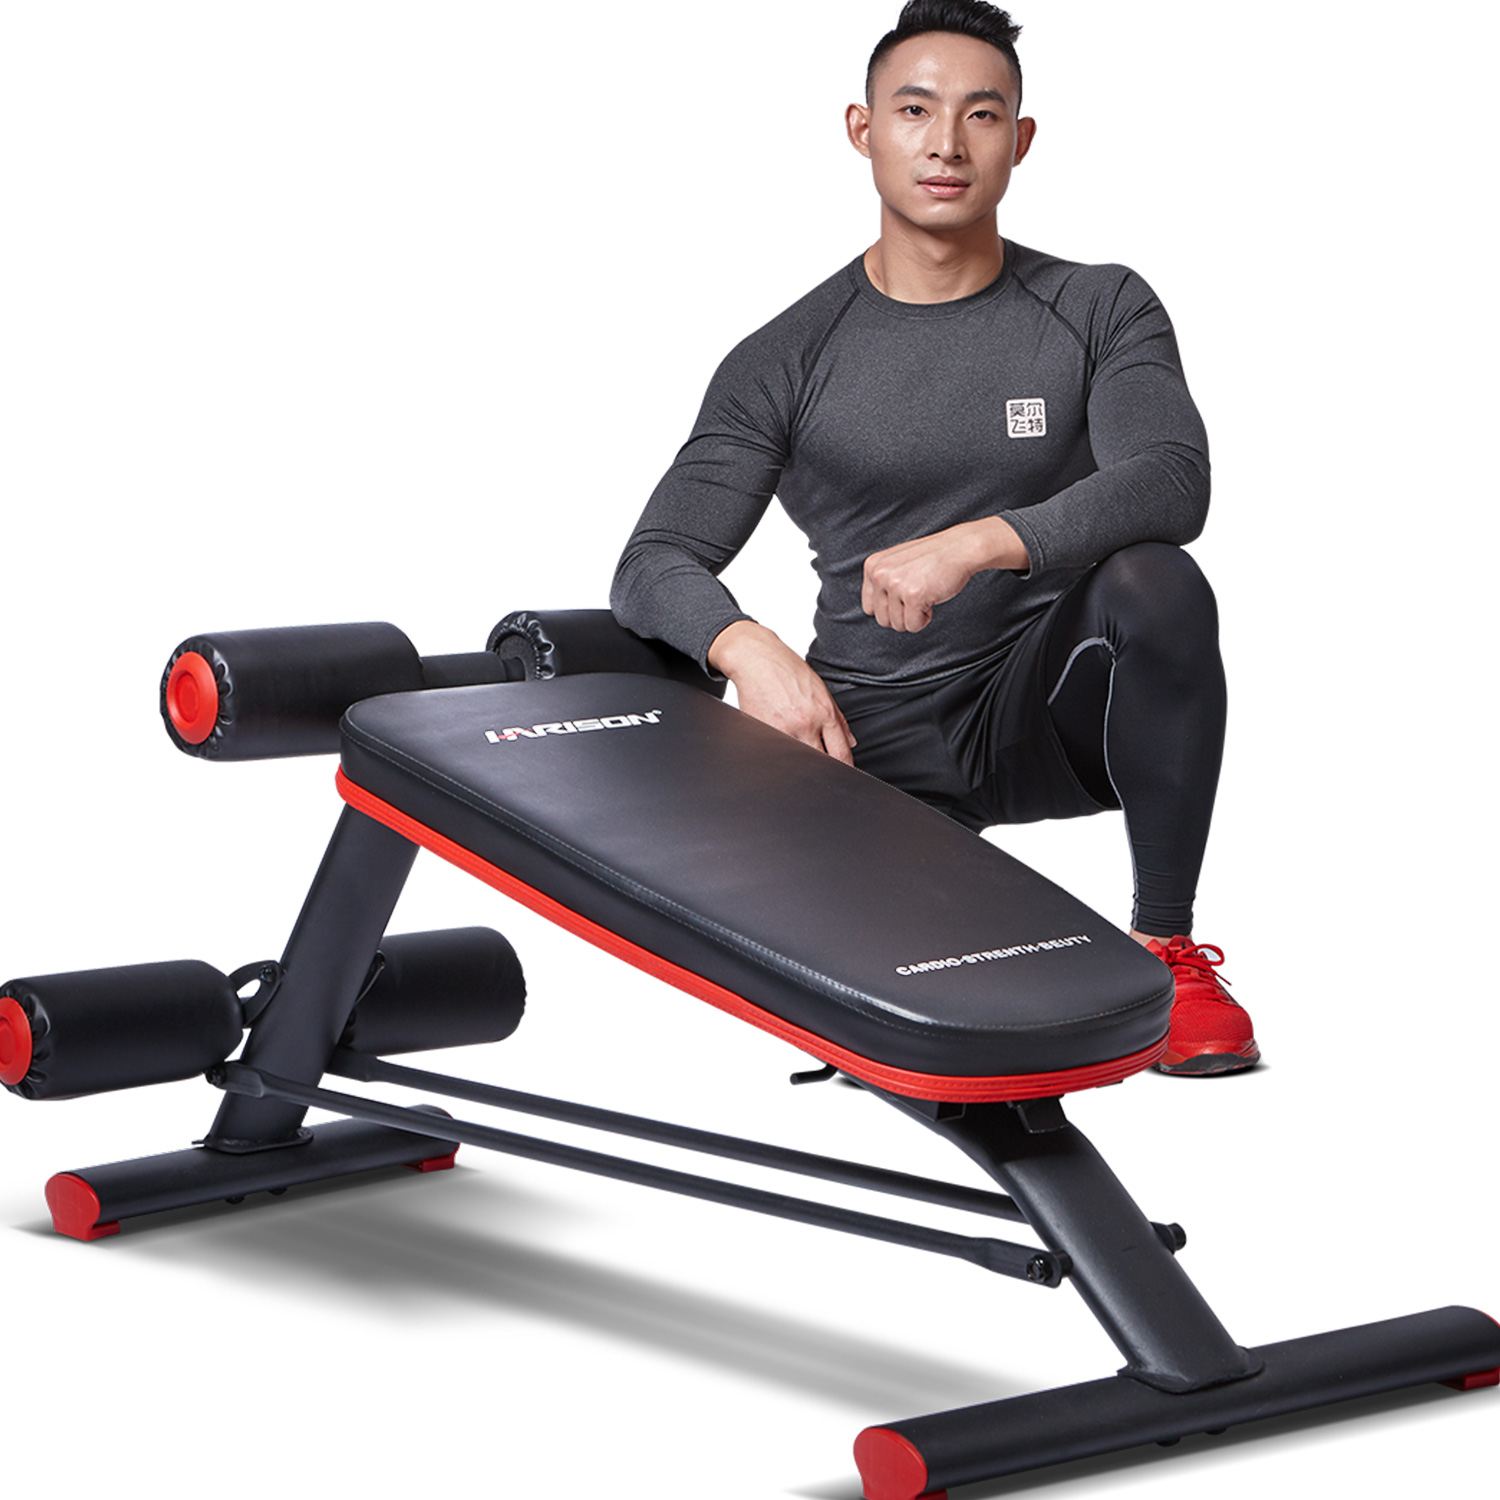 Best Home Strength Training Equipment to Keep Fit in 2019 | Exercise ...